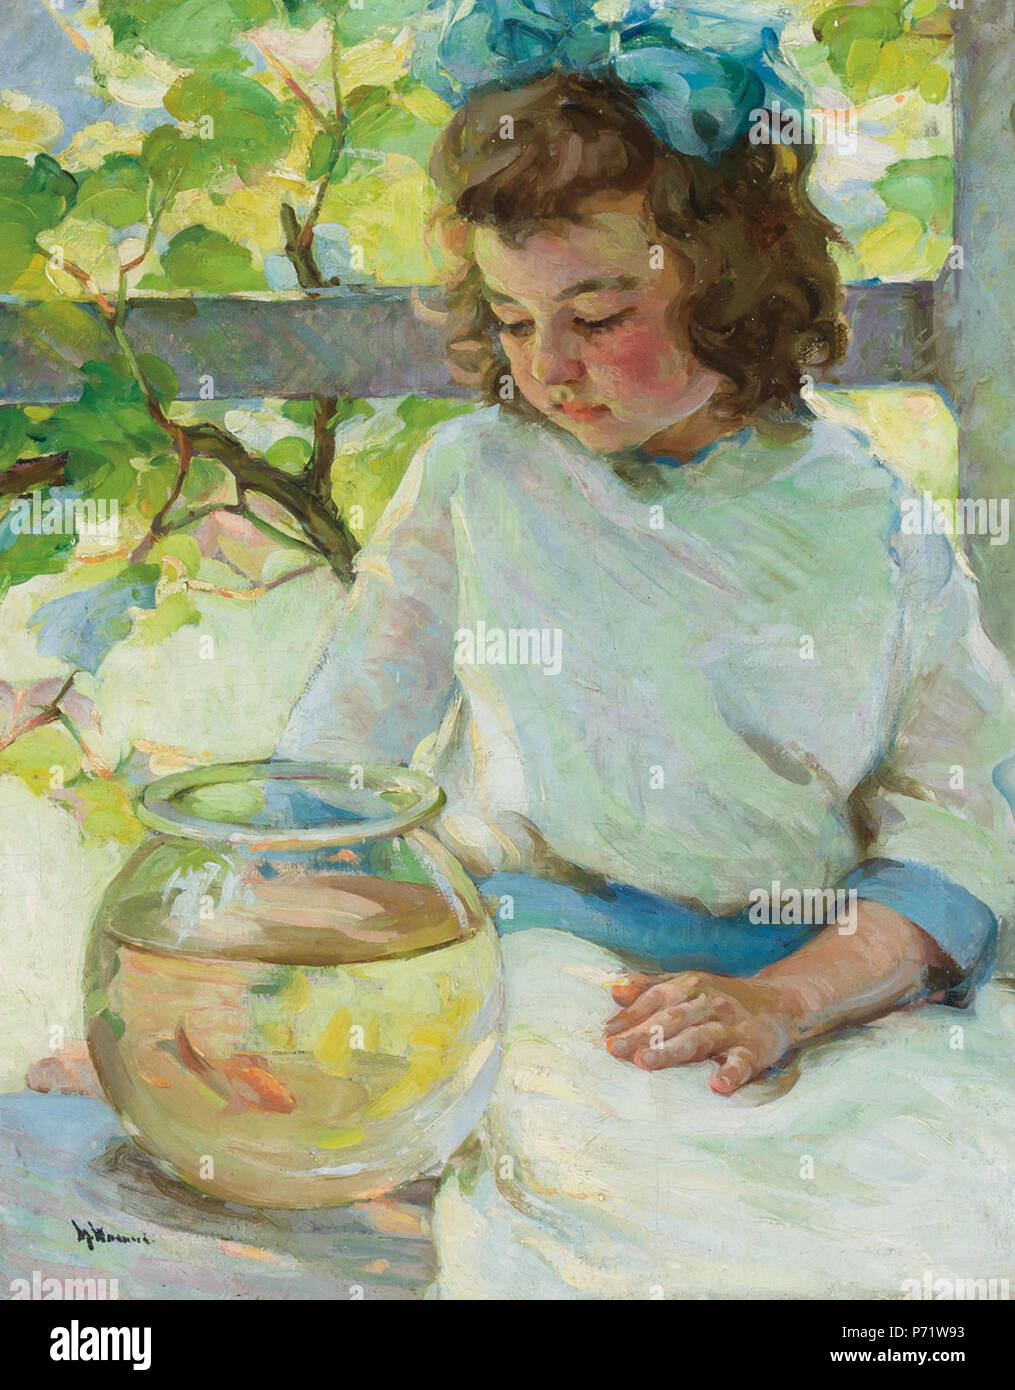 English: Young Girl with Fish Bowl by Mabel May Woodward, oil on canvas, 20 x 16 inches . N/A 54 'Young Girl with Fish Bowl' by Mabel May Woodward Stock Photo